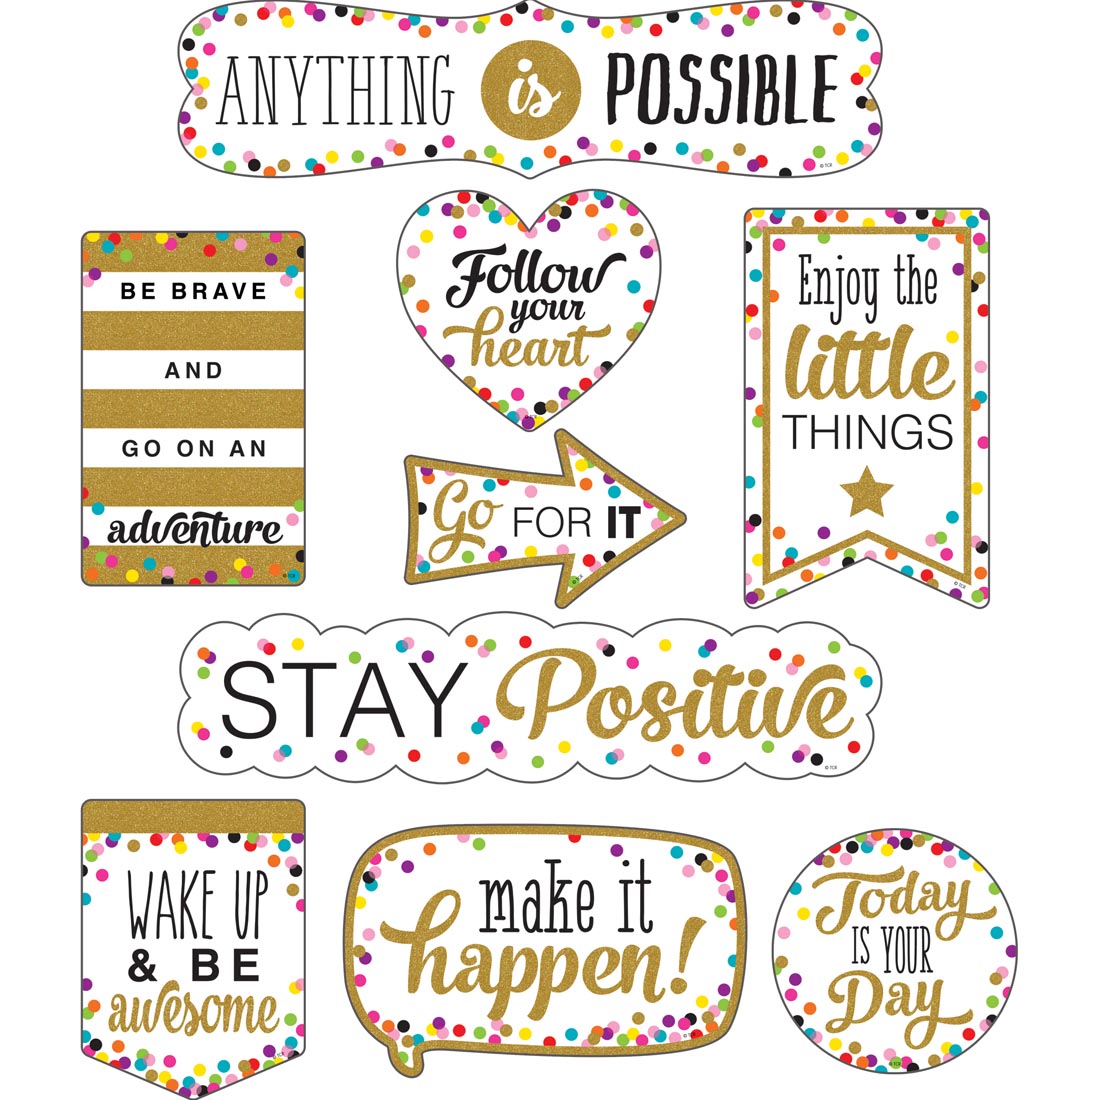 Clingy Thingies Positive Sayings Accents from the Confetti collection by Teacher Created Resources